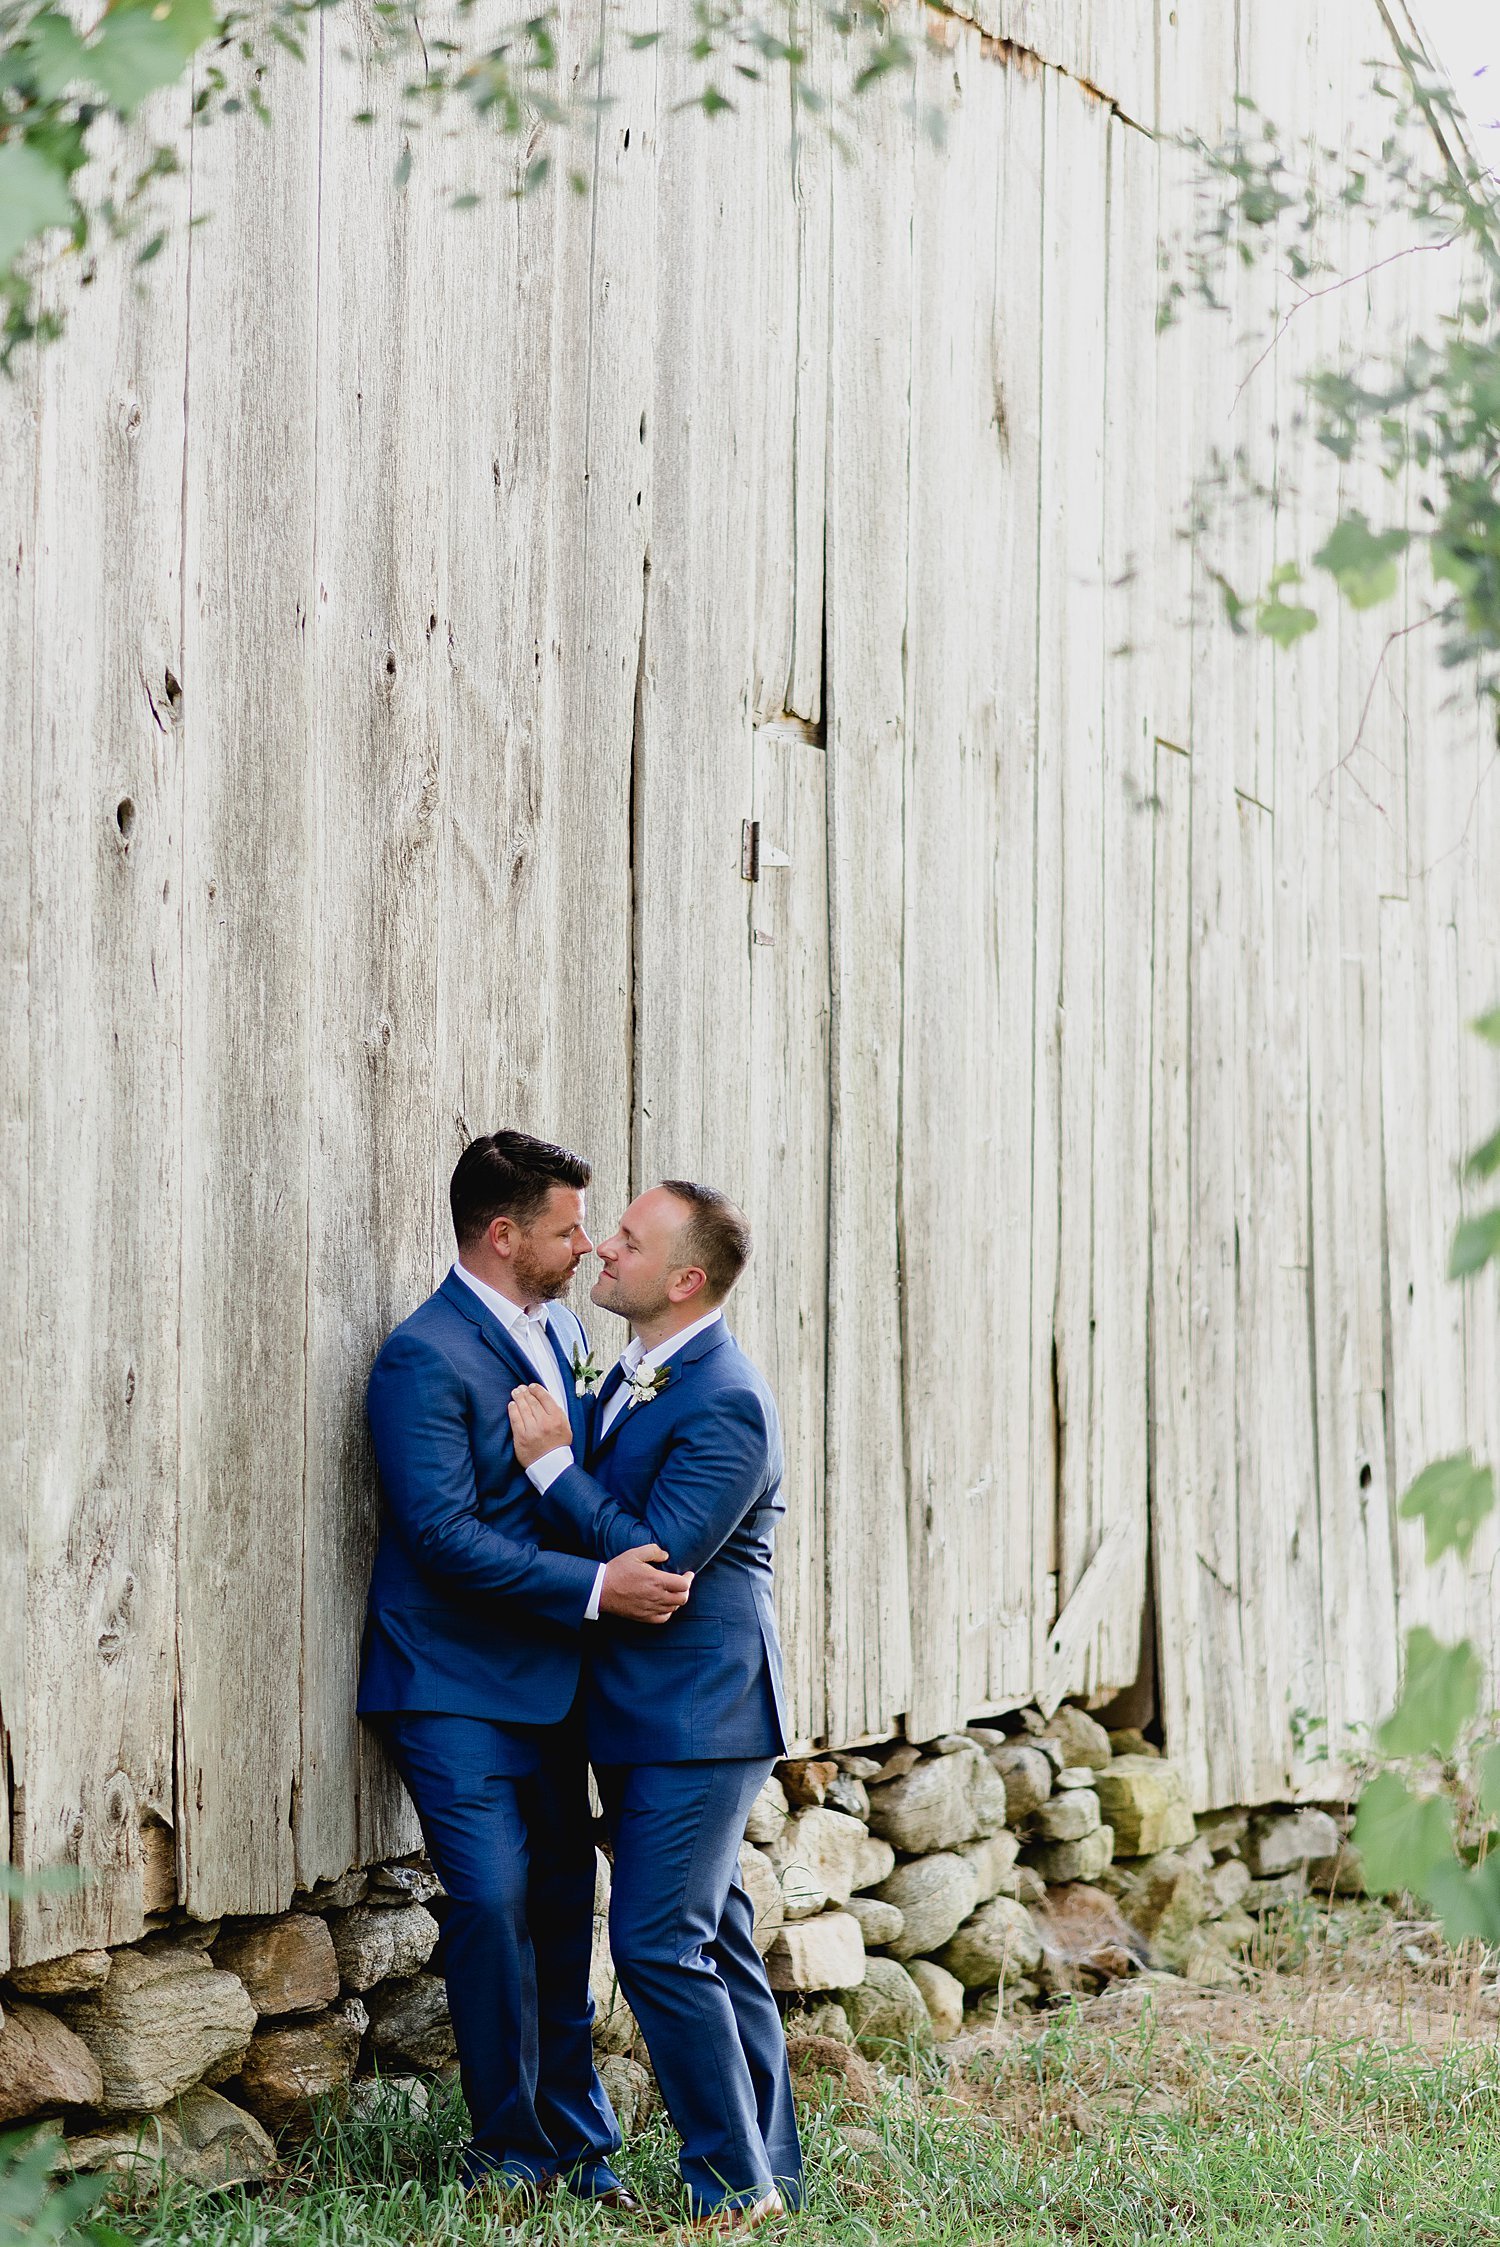 An Intimate Elopement at an Airbnb in Prince Edward County | Prince Edward County Wedding Photographer | Holly McMurter Photographs_0034.jpg